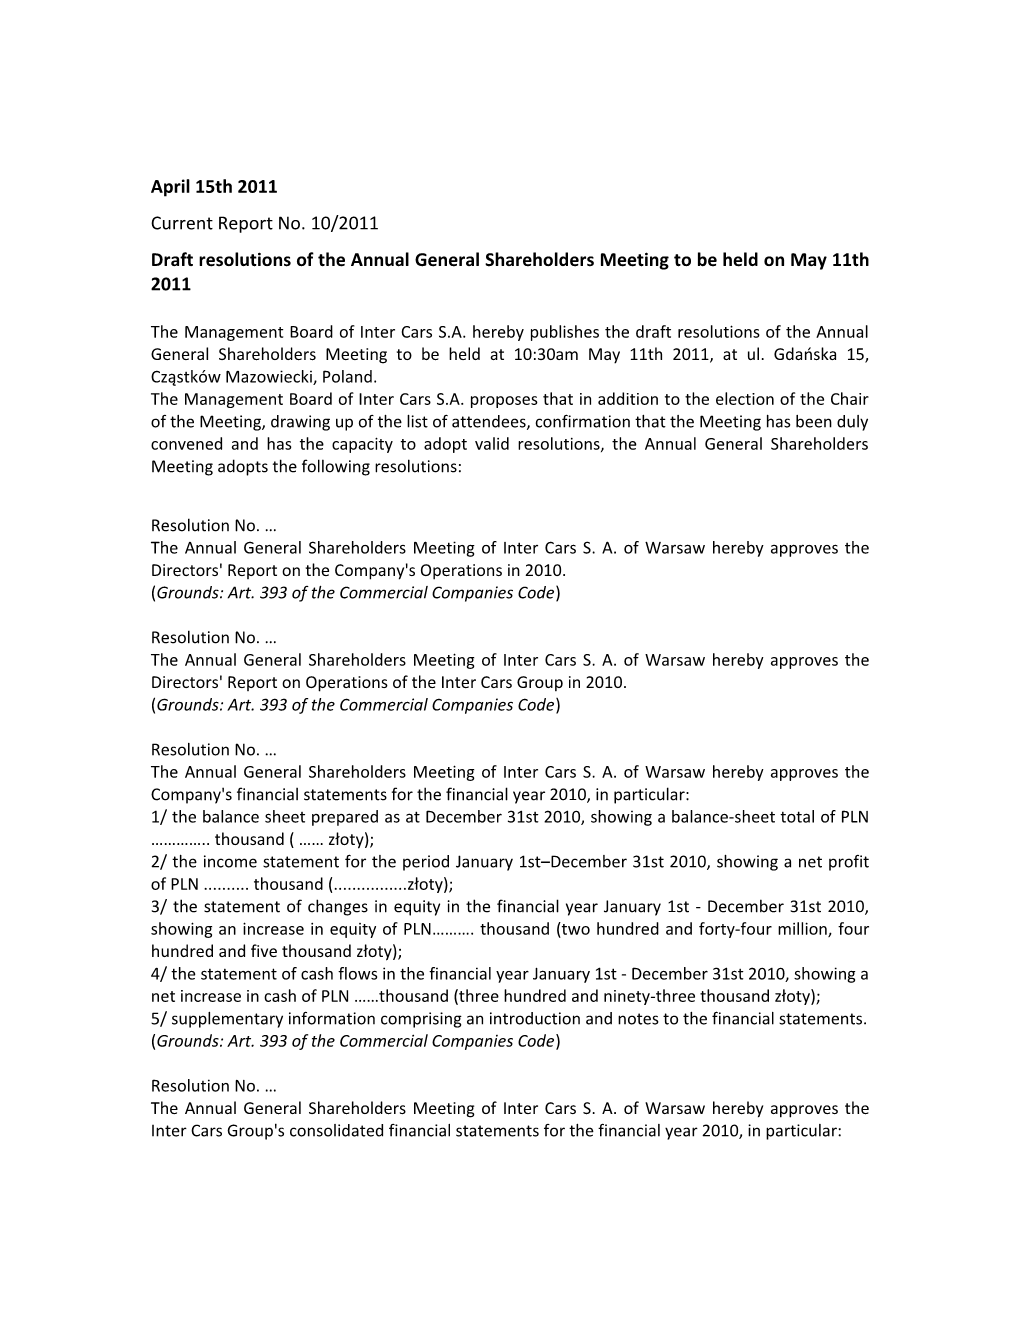 Draft Resolutions of the Annual General Shareholders Meeting to Be Held on May 11Th 2011